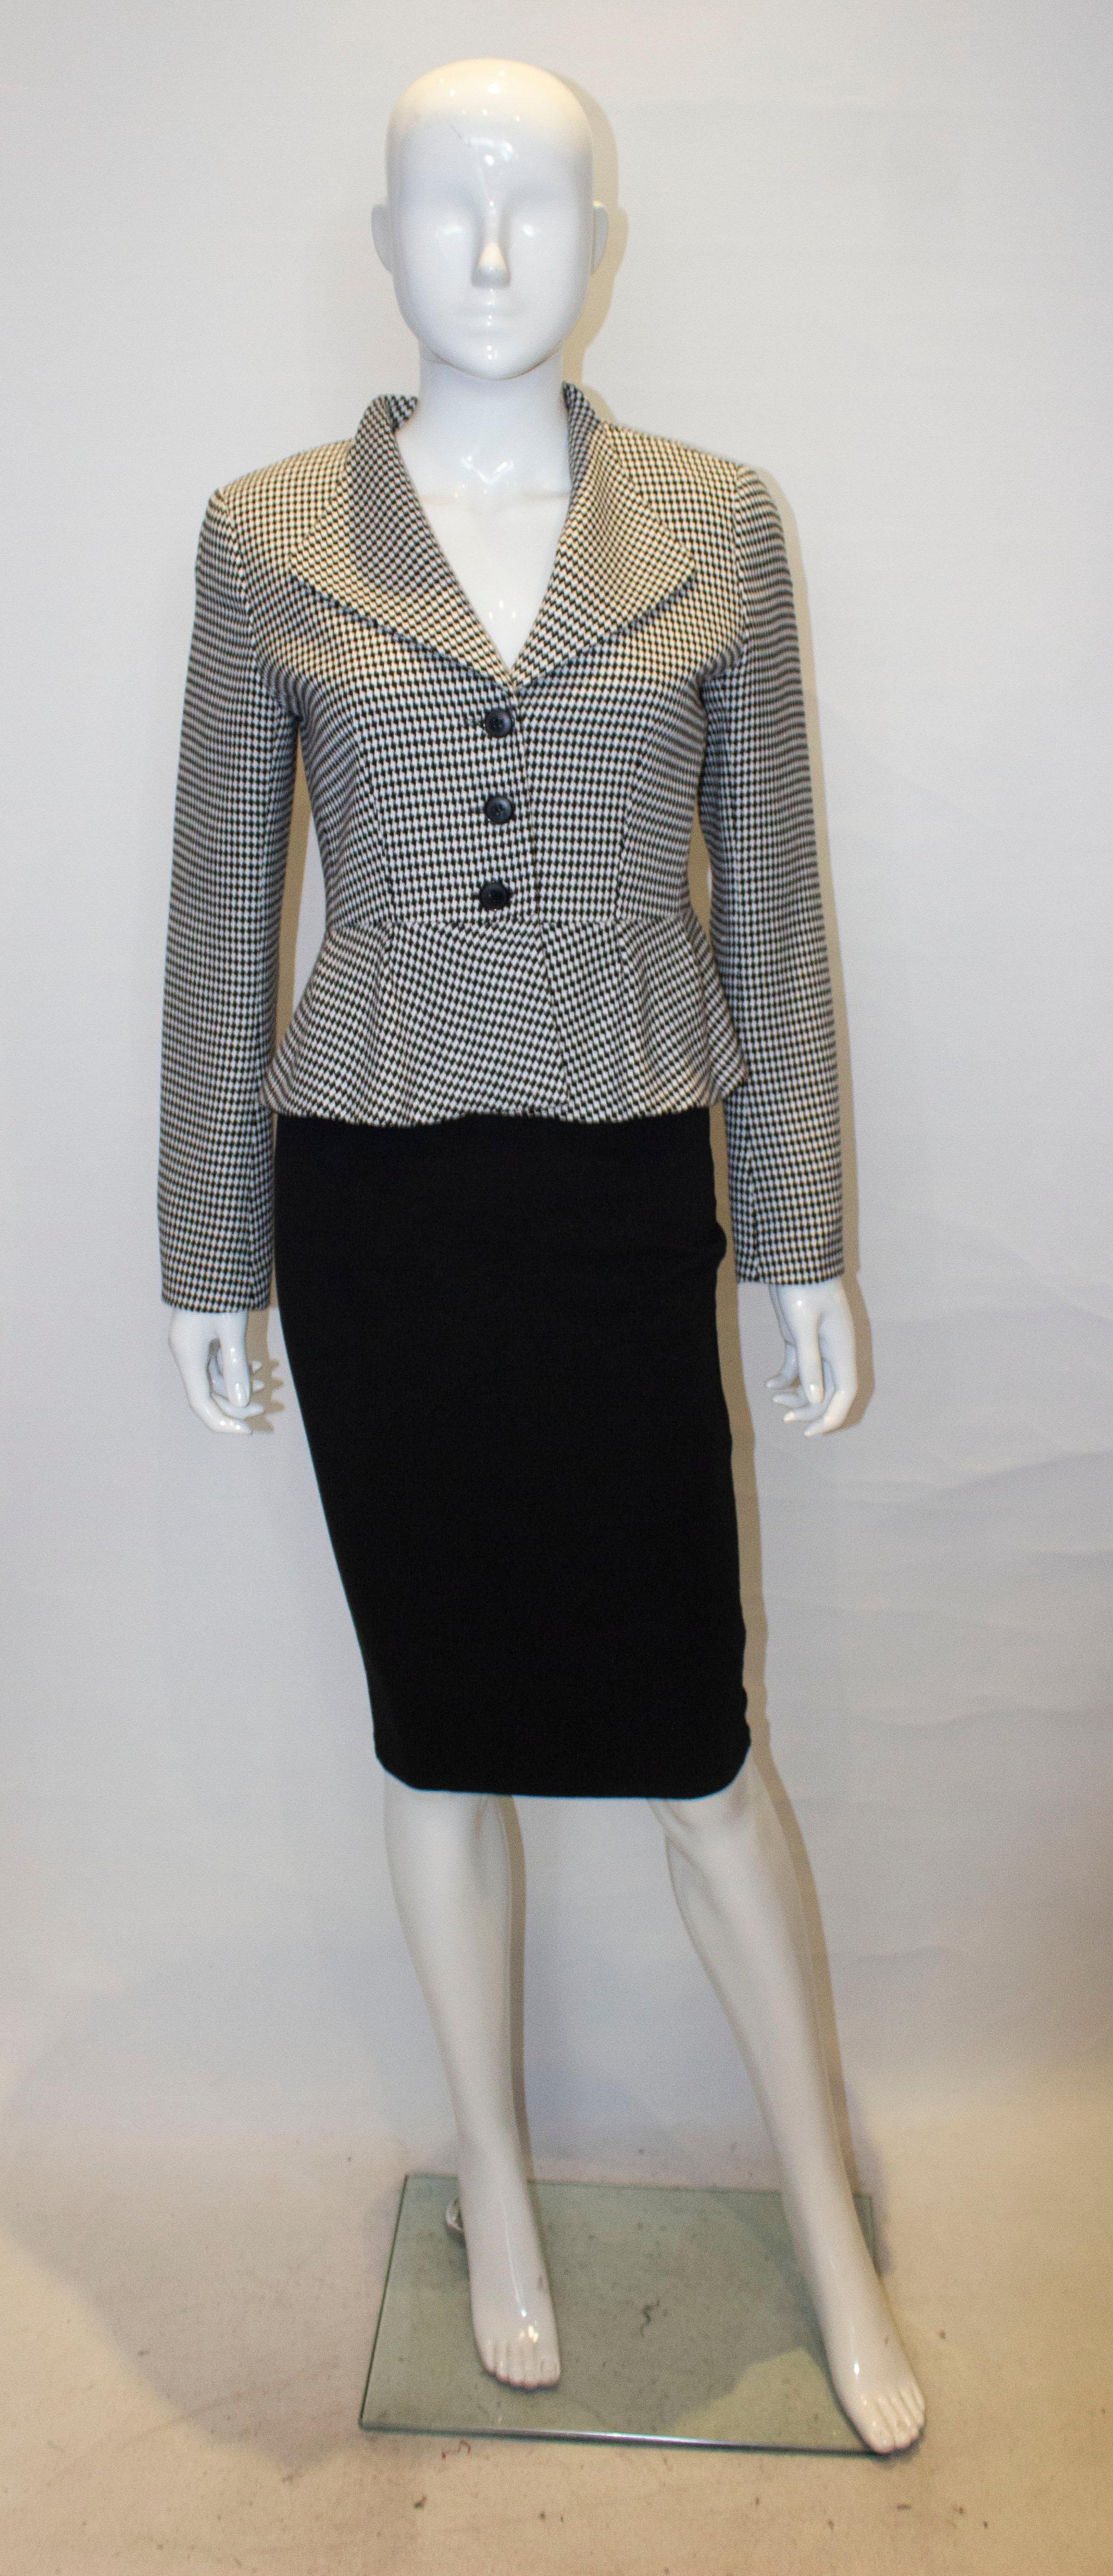 A nice fitted jacket by Tristar of Canada. The jacket is in a black and white fabric with interesting collar and three button opening.